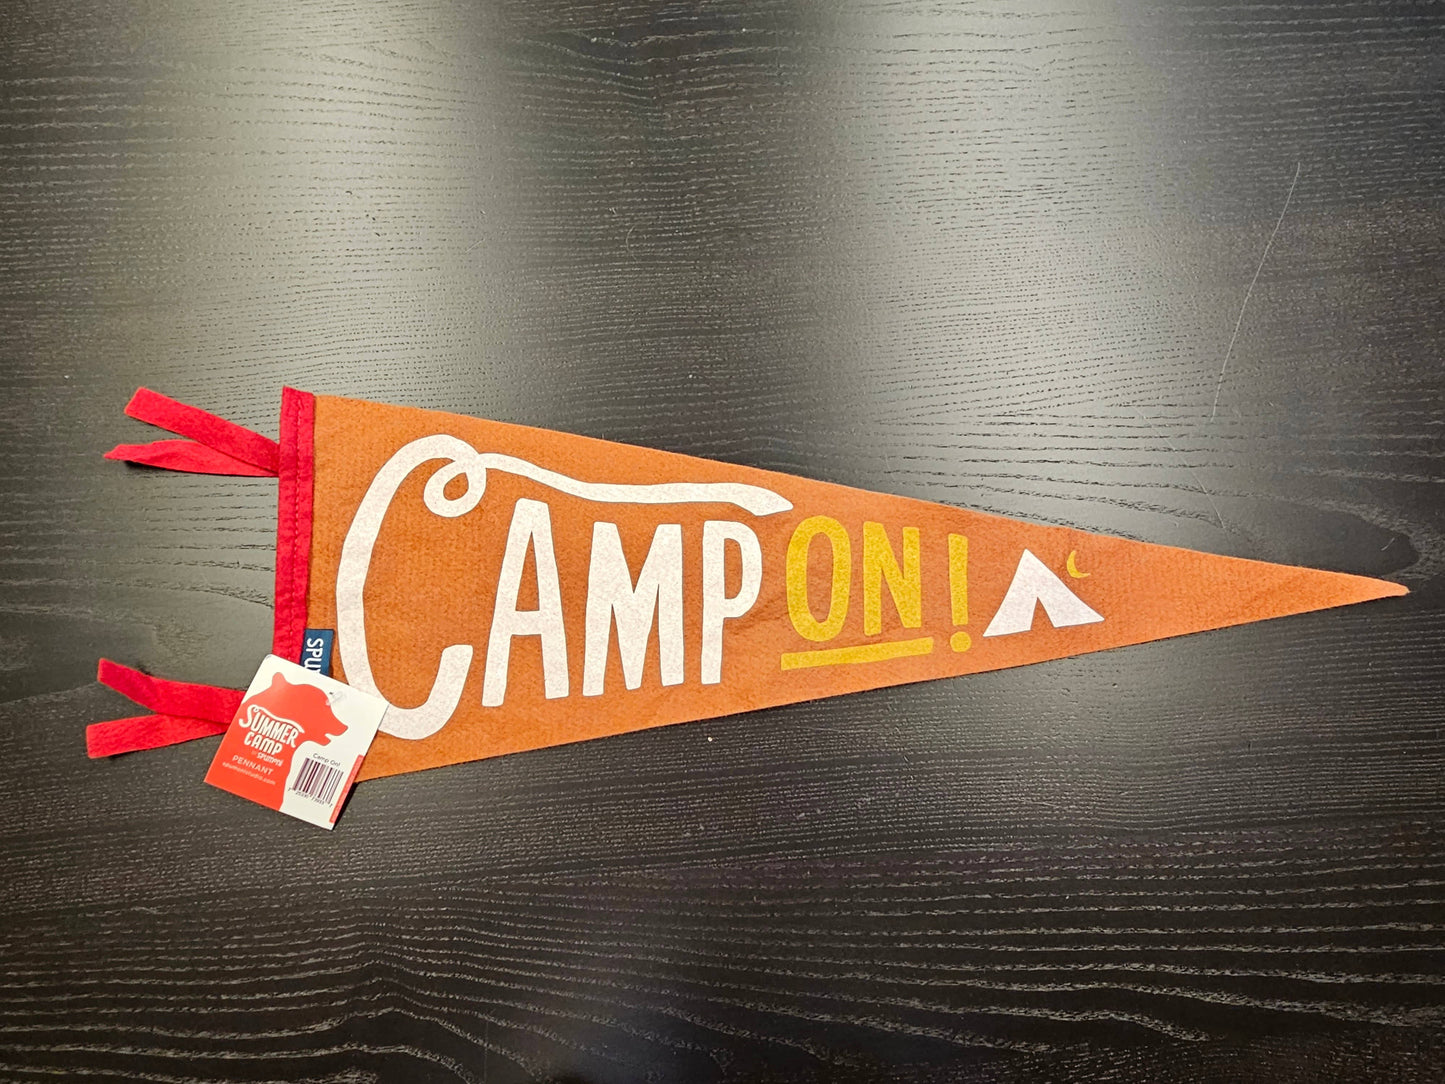 Camp On (large pennant Vintage-styled Screen Printed)